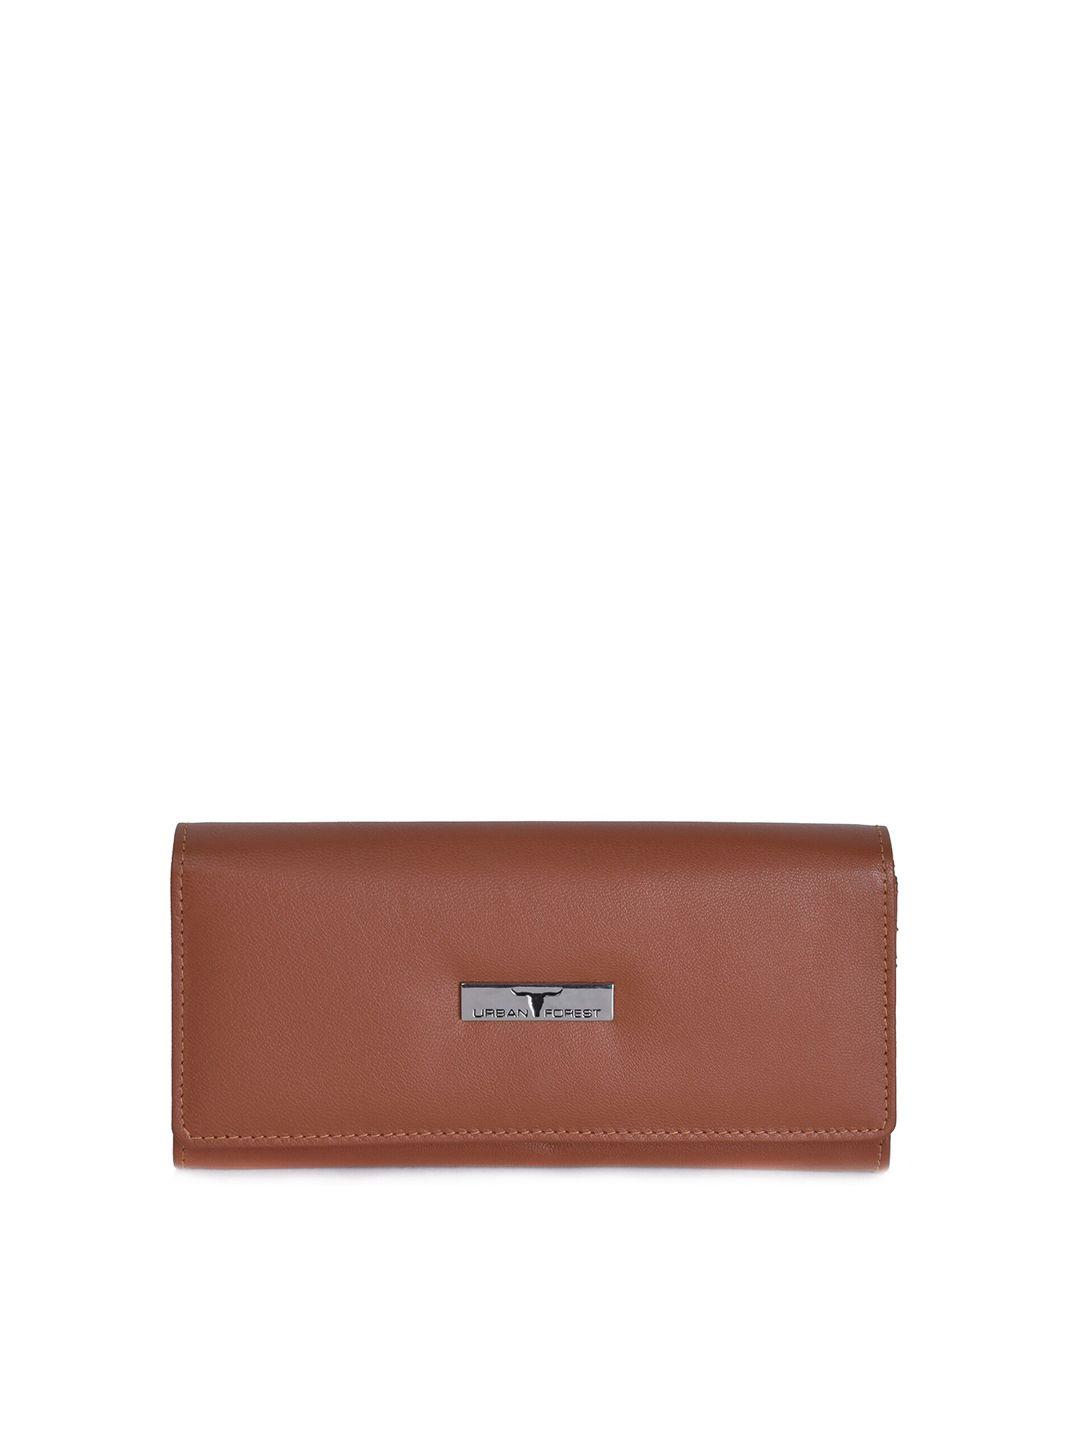 urban forest leather two fold wallet